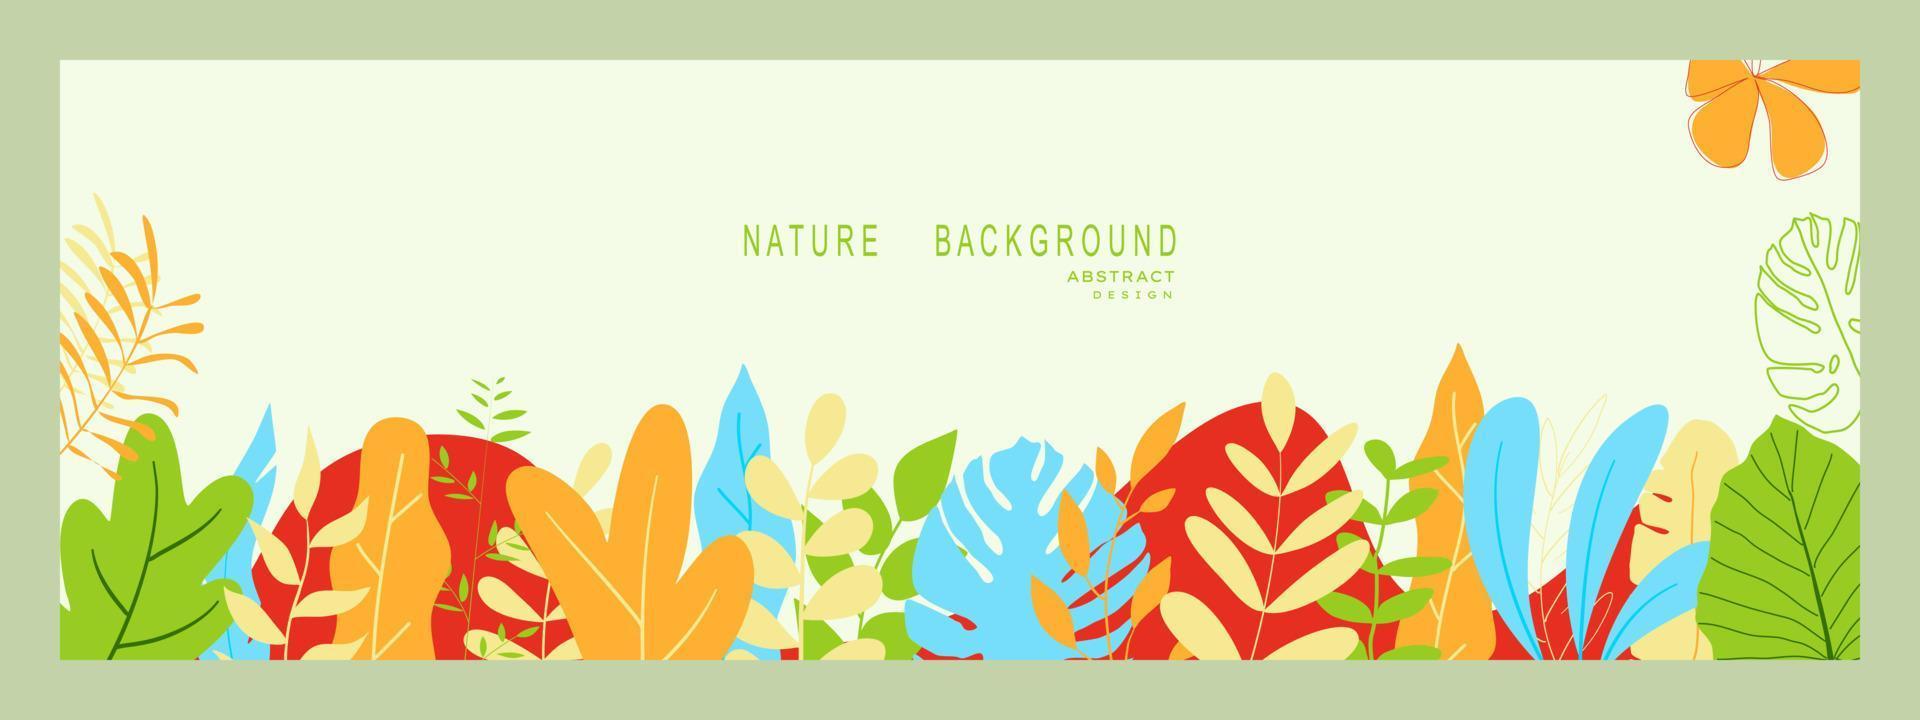 Nature abstract backgrounds.minimal trendy style. various shapes set up design templates good for background card greeting wallpaper brochure flier invitation and other. vector illustration